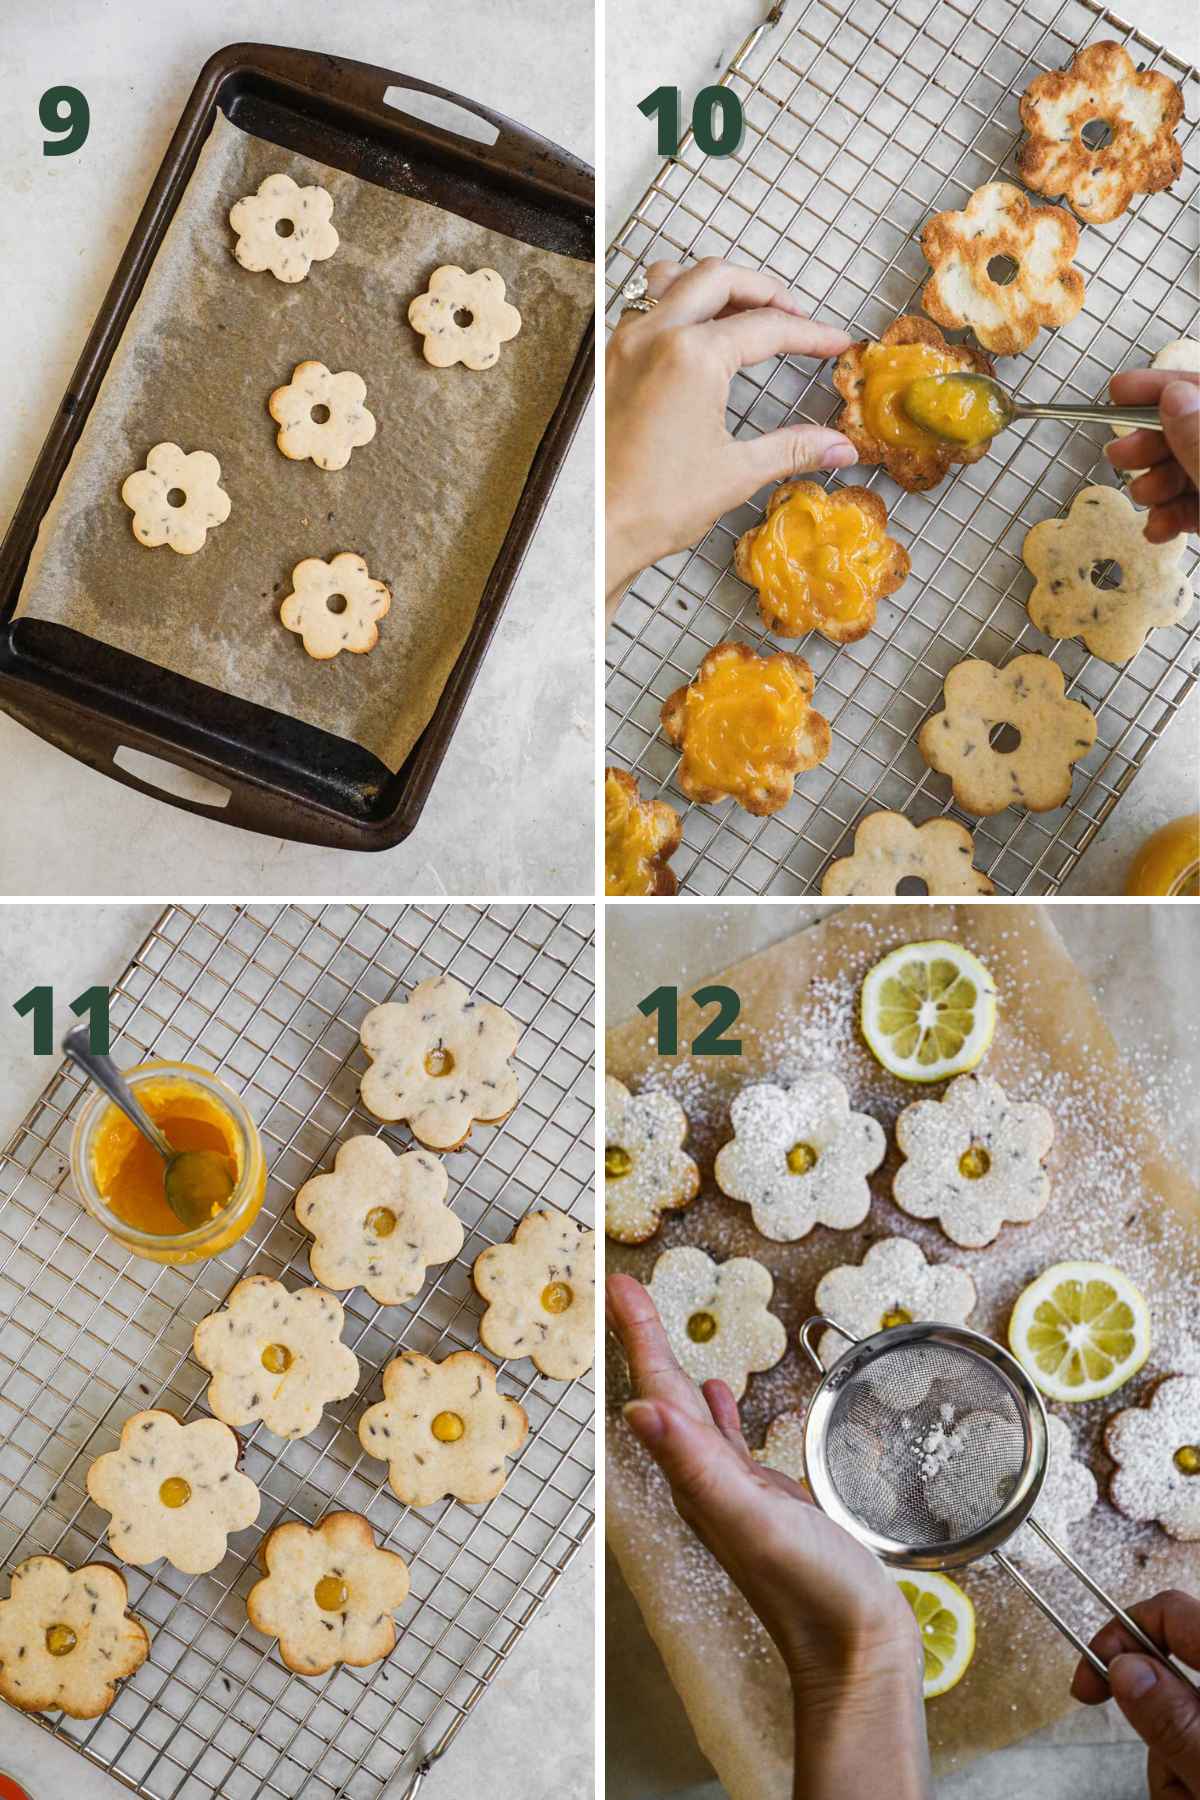 Steps to make lavender lemon curd cookies, bake cookies; add a dollop of curd on cookies and making sandwiches; dusting powdered sugar on top.